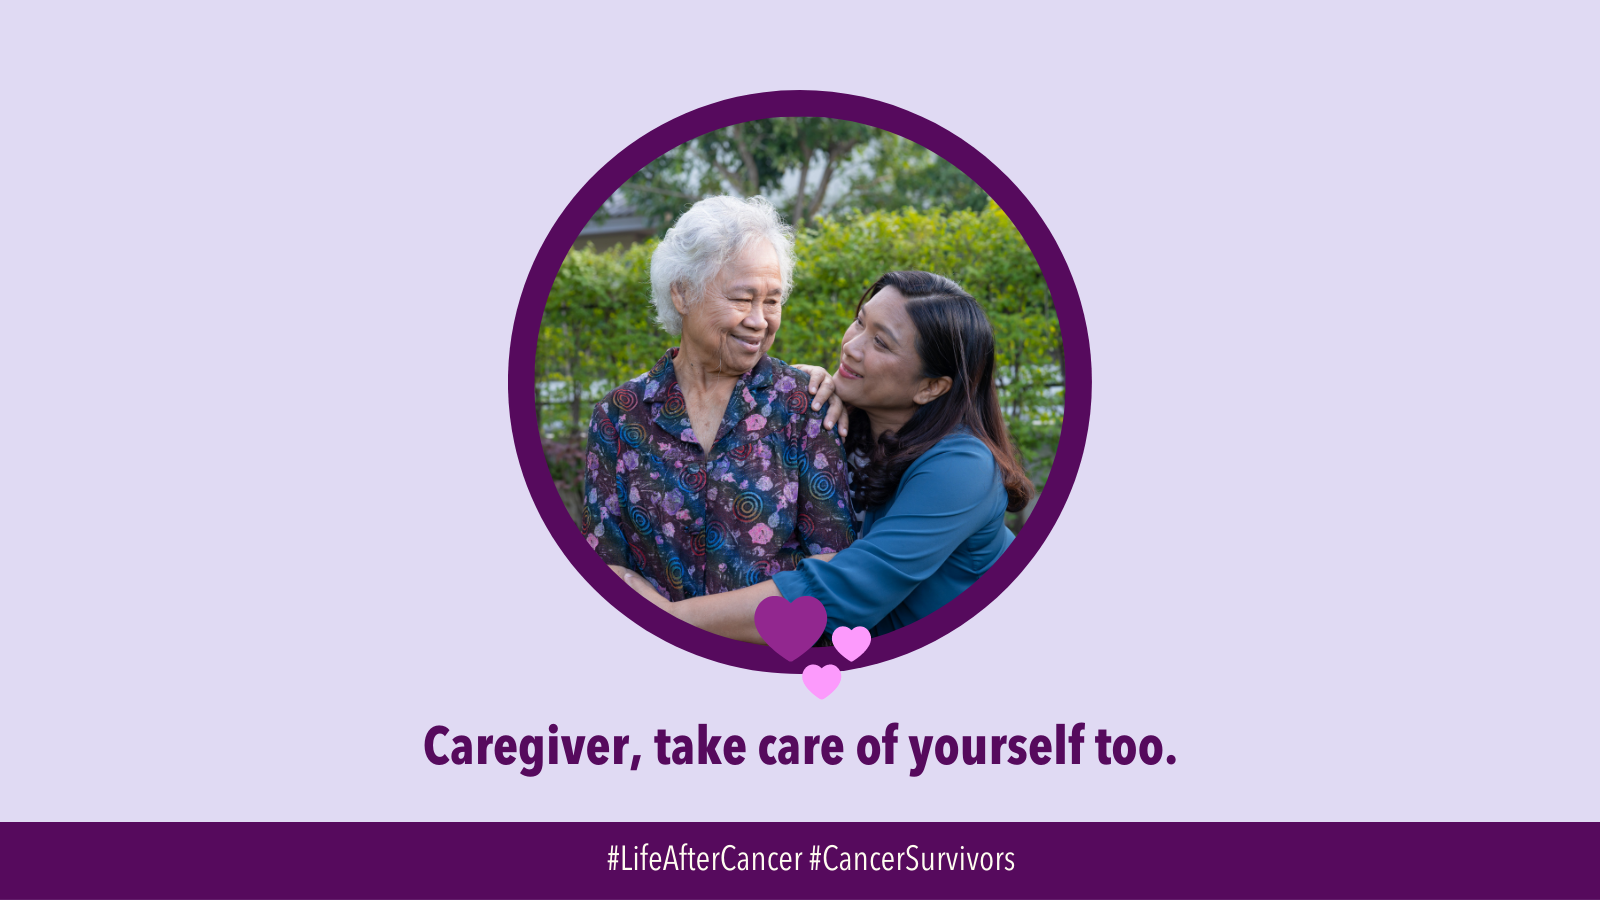 Image of caregiver with patient in a purple circle on a lavendar background. Text below reads: Caregiver, take care of yourself too. 